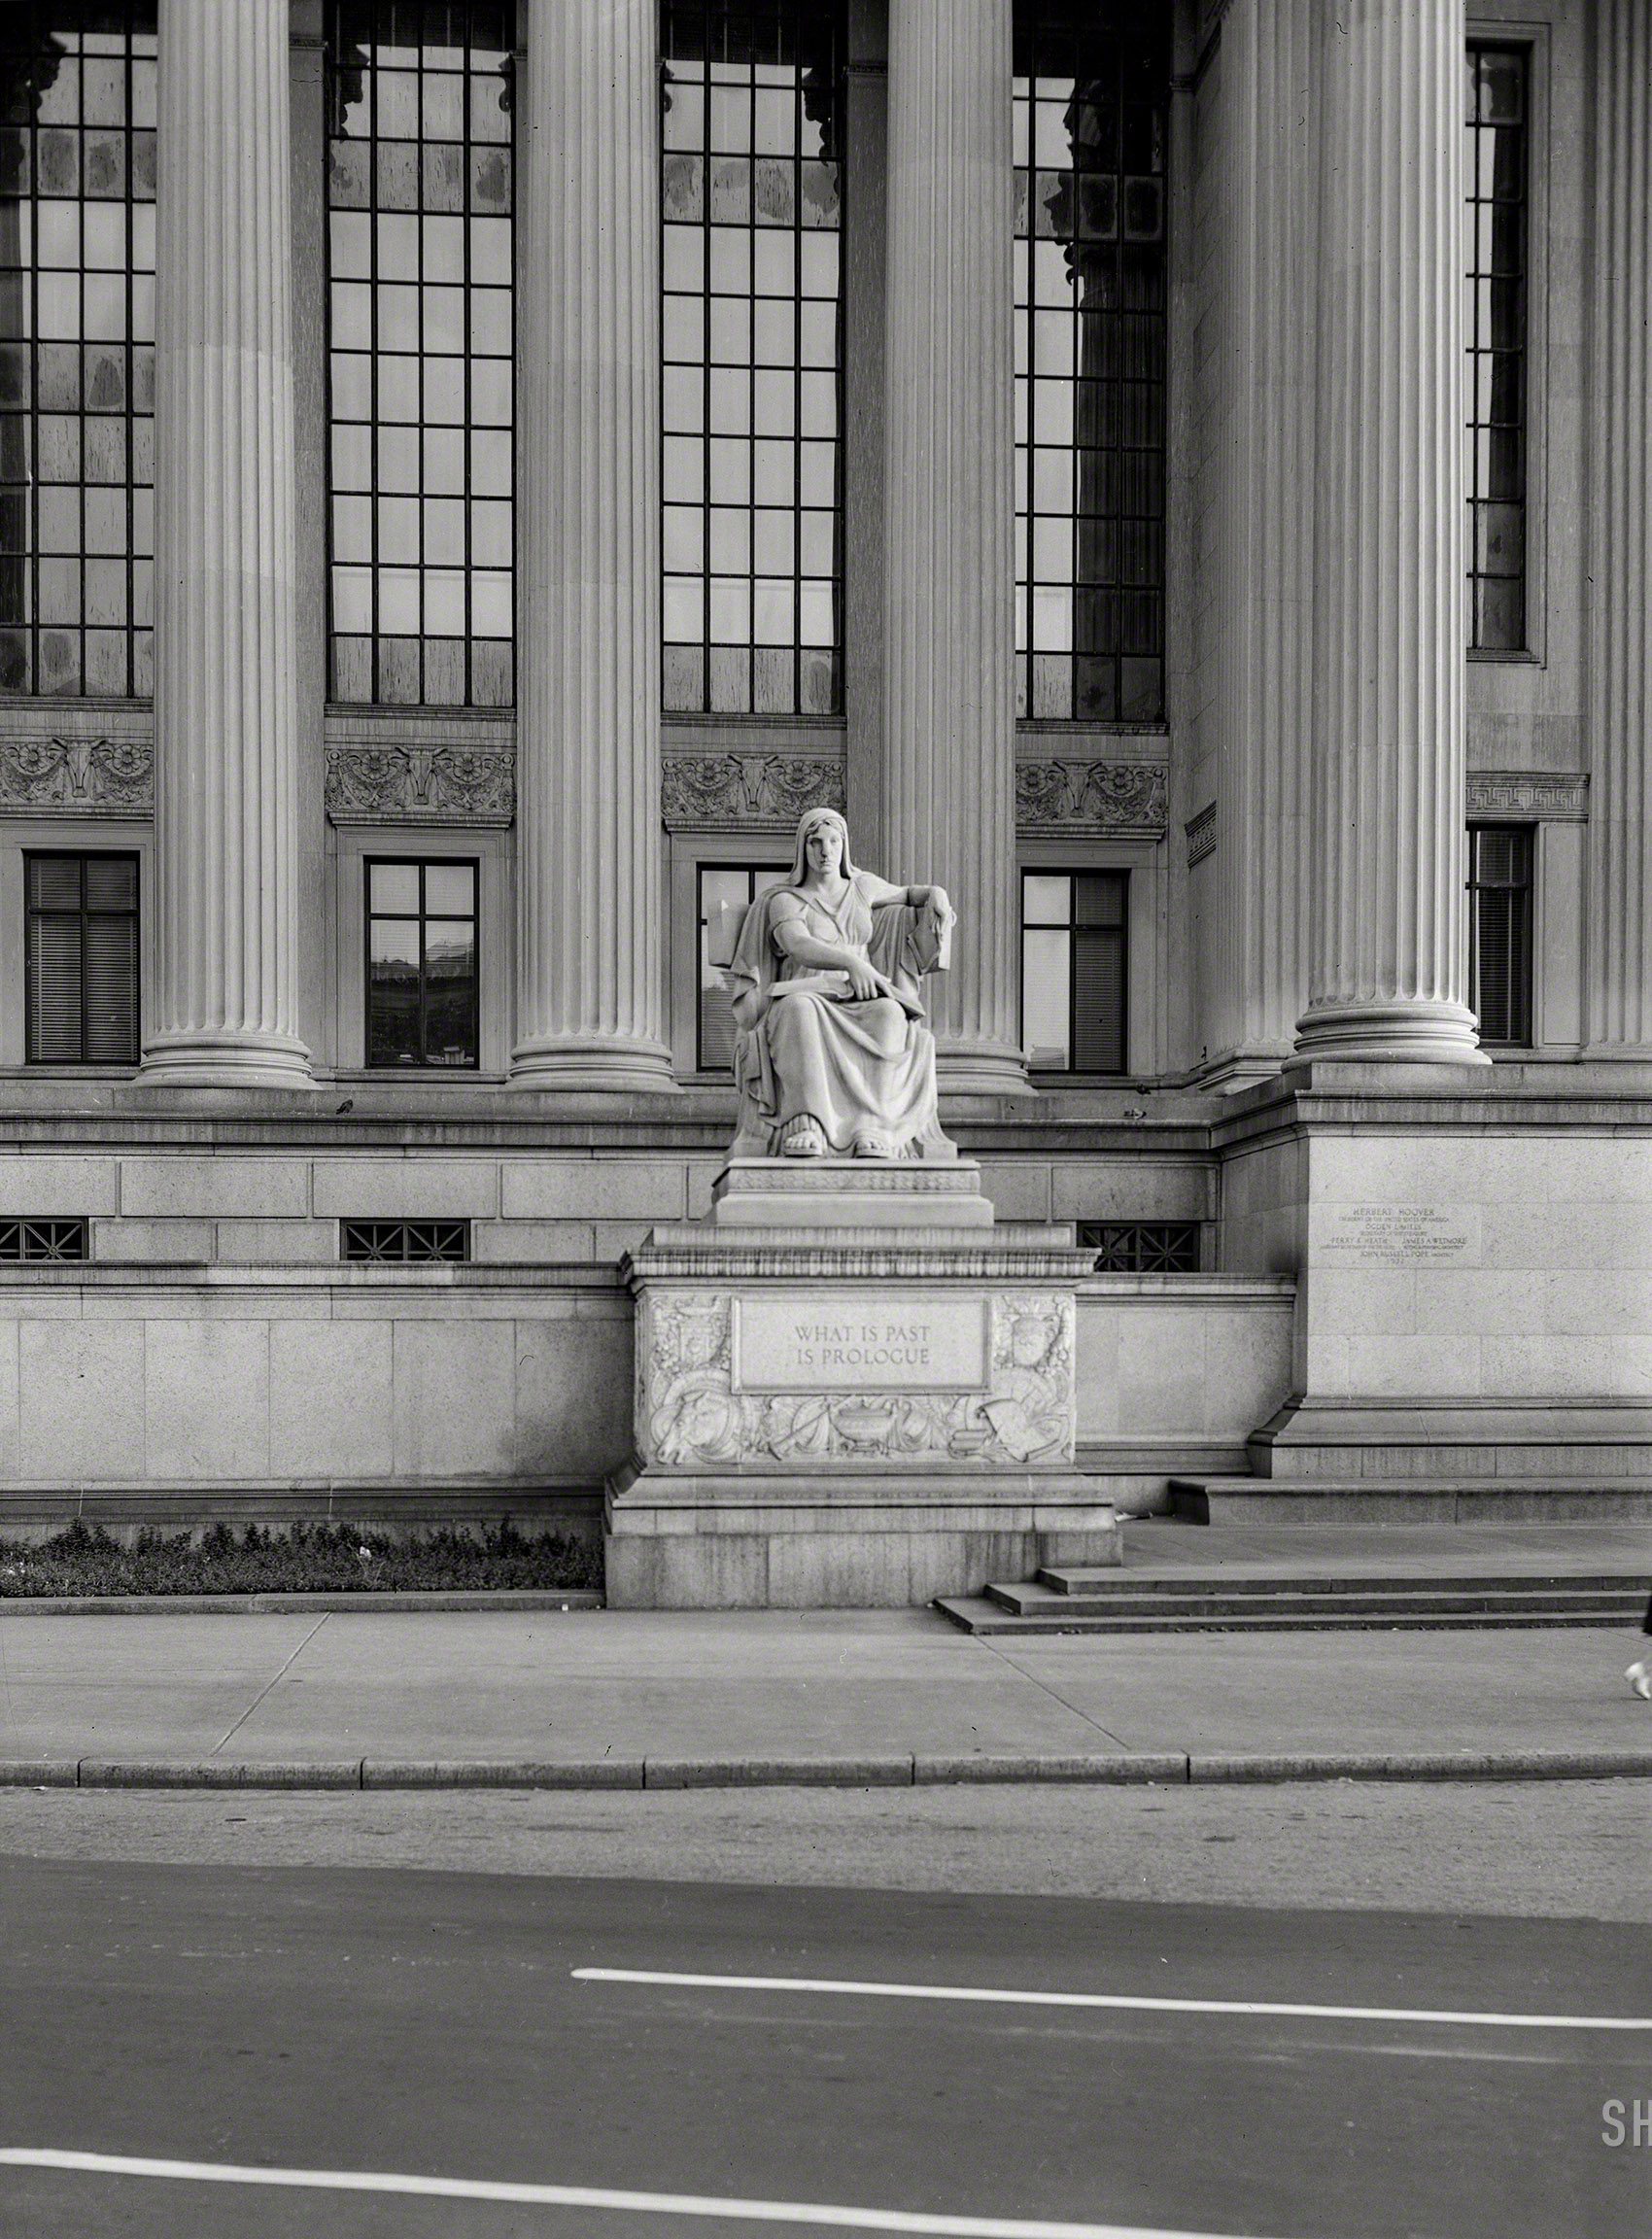 May 1942. Washington, D.C. "Statue at the Pennsylvania Avenue entrance to the National Archives." Acetate negative by John Ferrell for the Office of War Information. View full size.